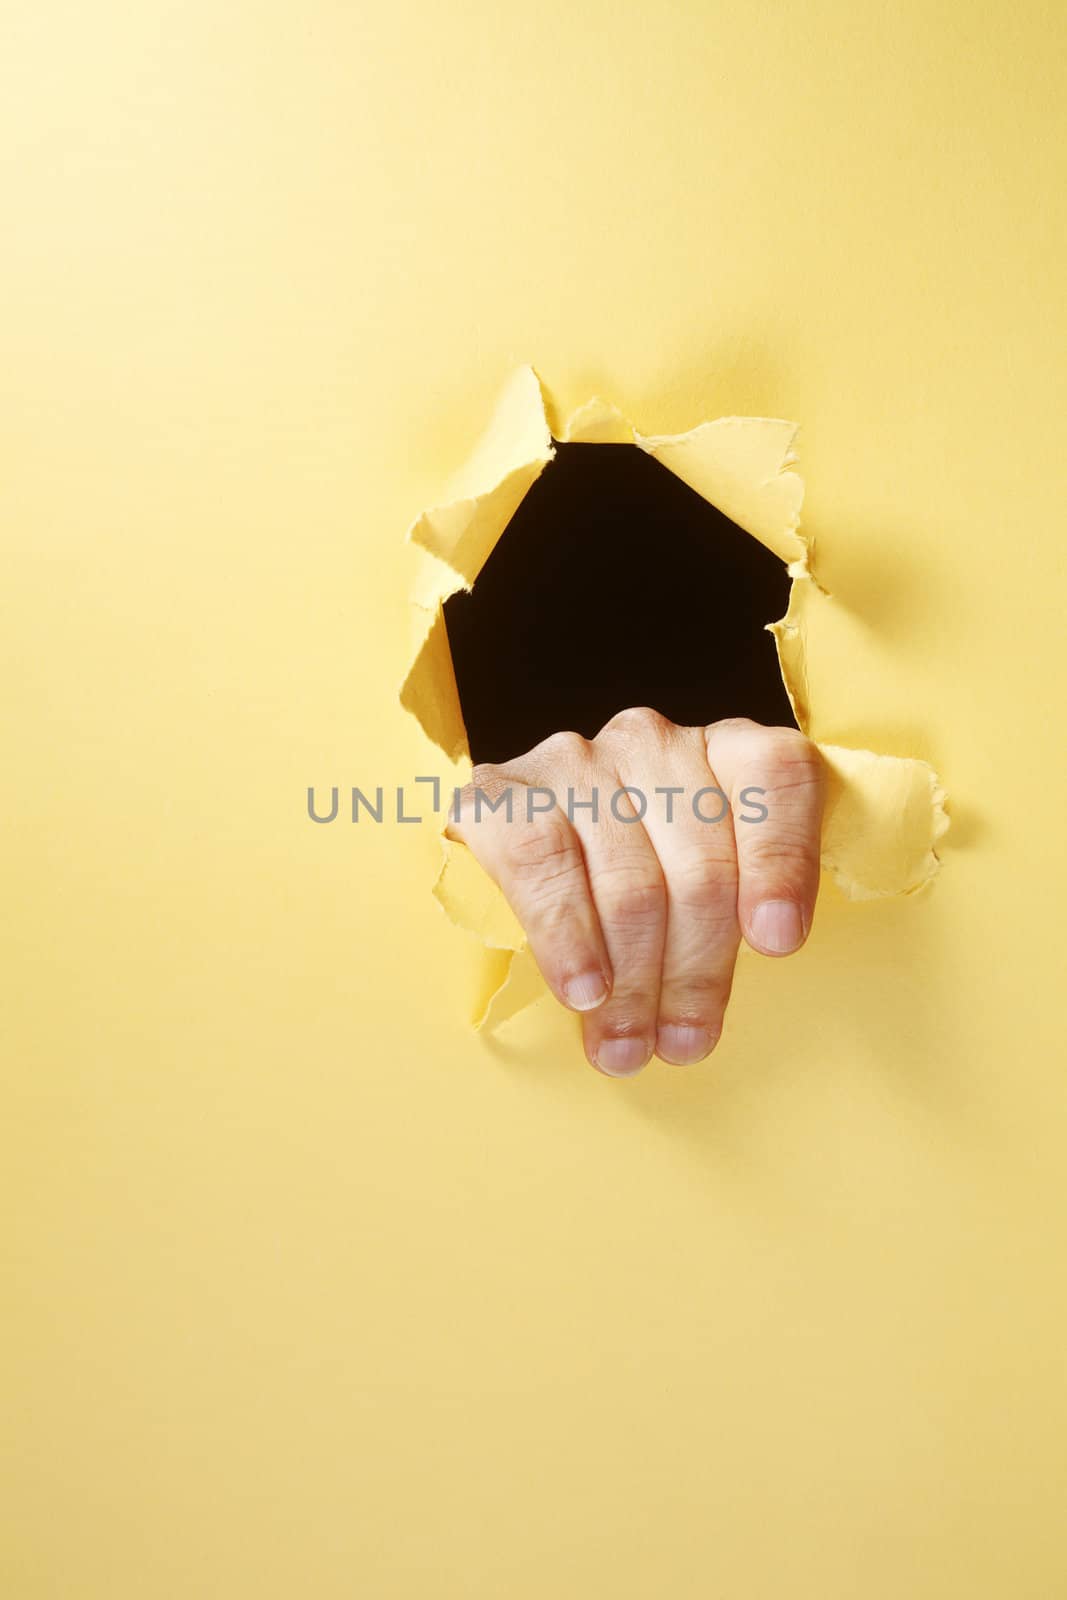 stock image of the hand breaking through a hole